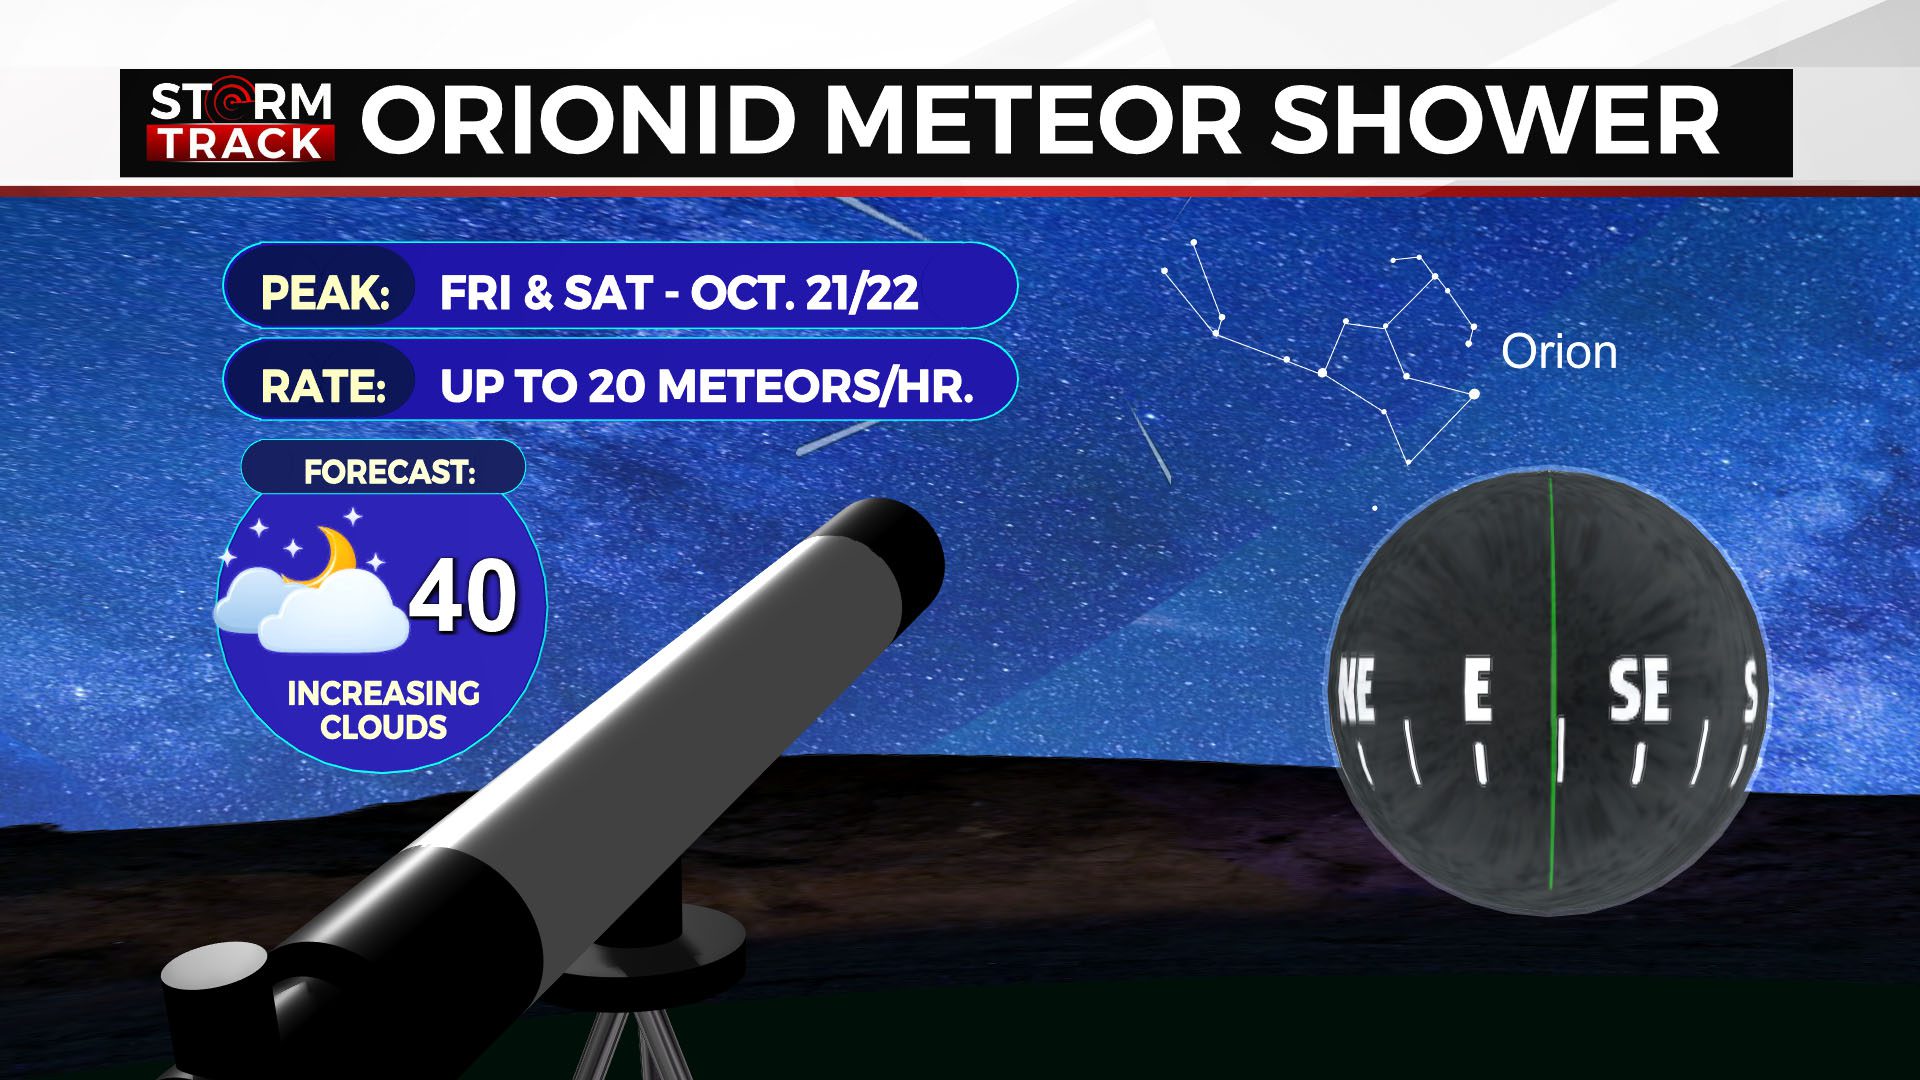 graph showing peak times of Orionid Meteor shower